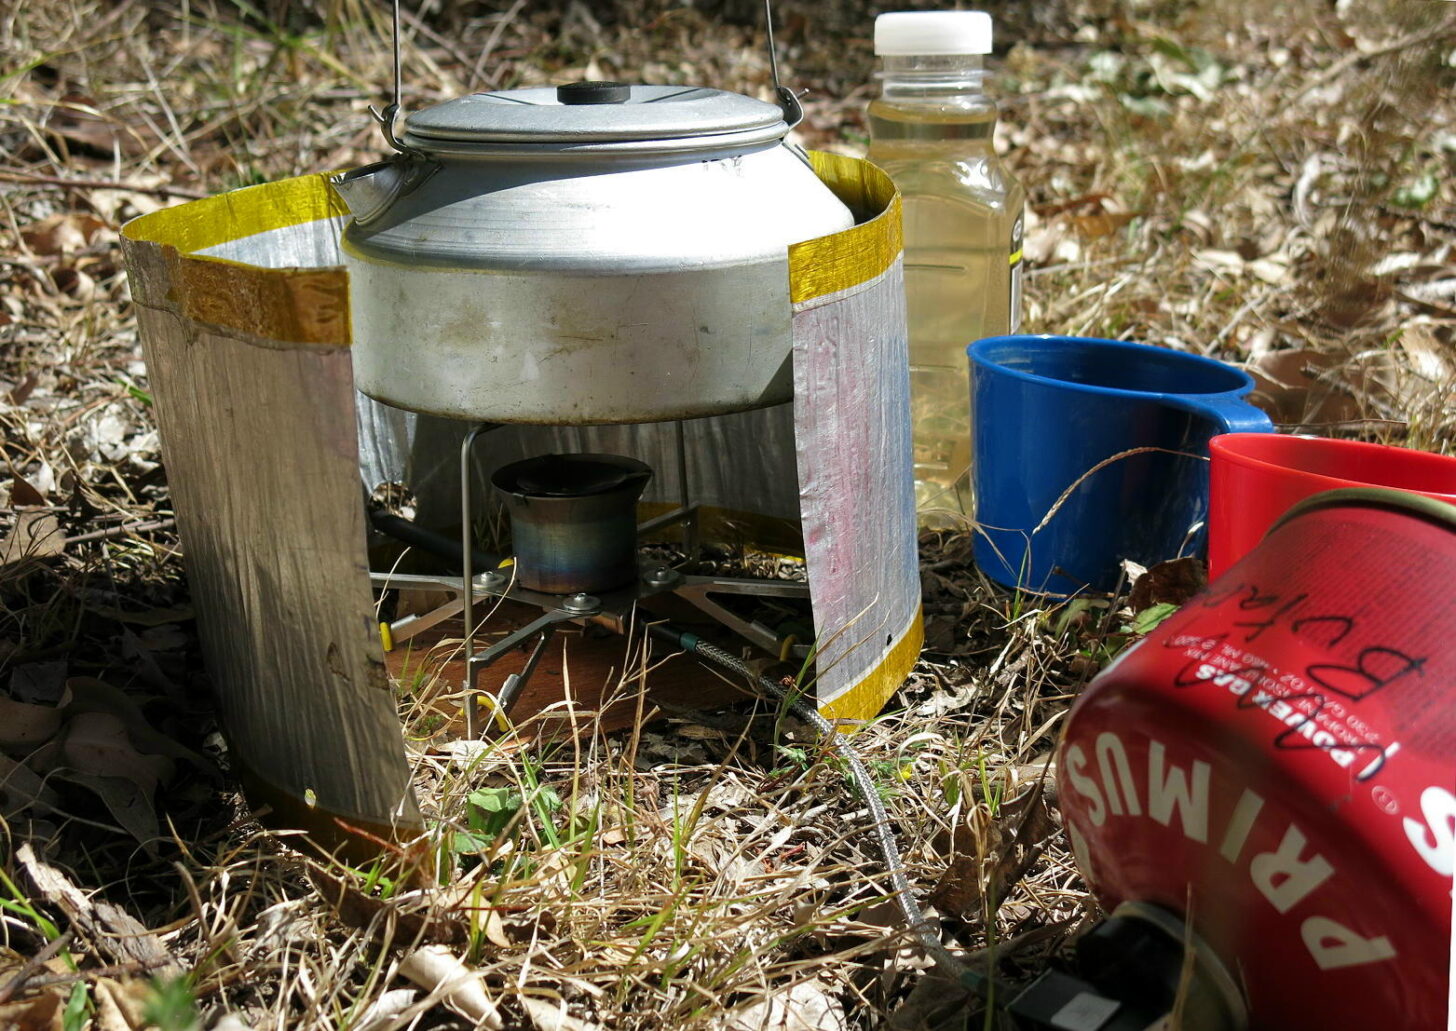 a photo of a remote inverted canister stove being used